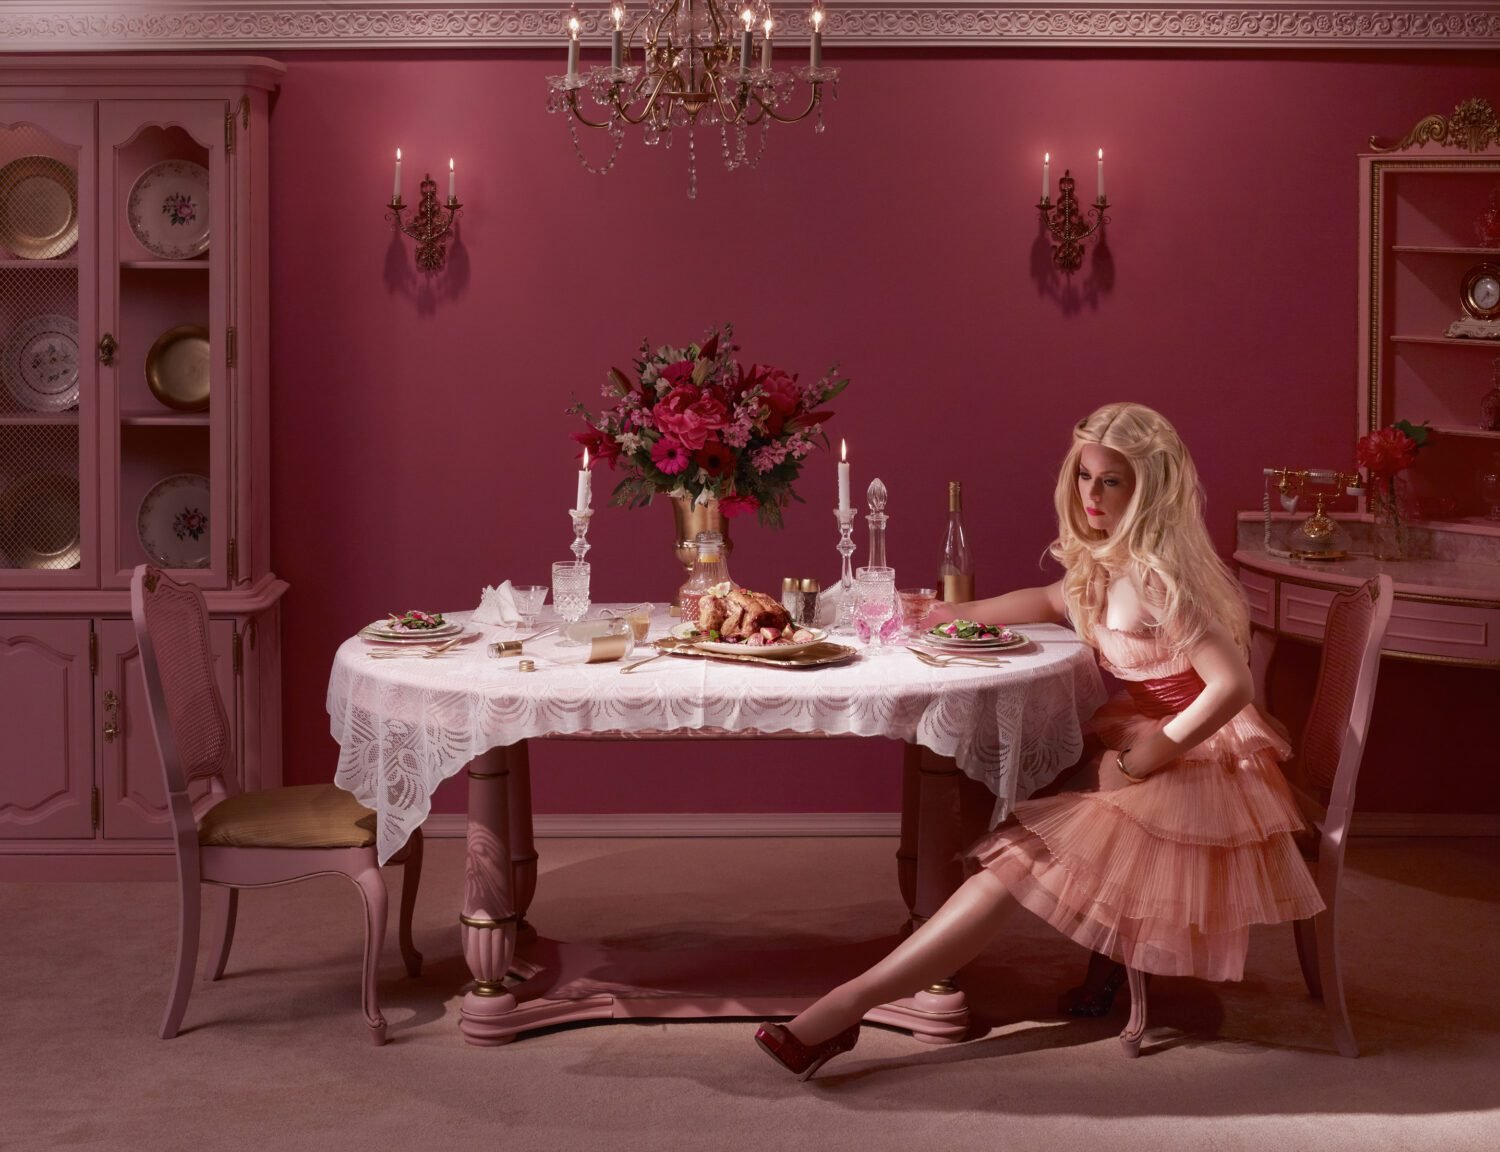 dina goldstein in the dollhouse dining alone